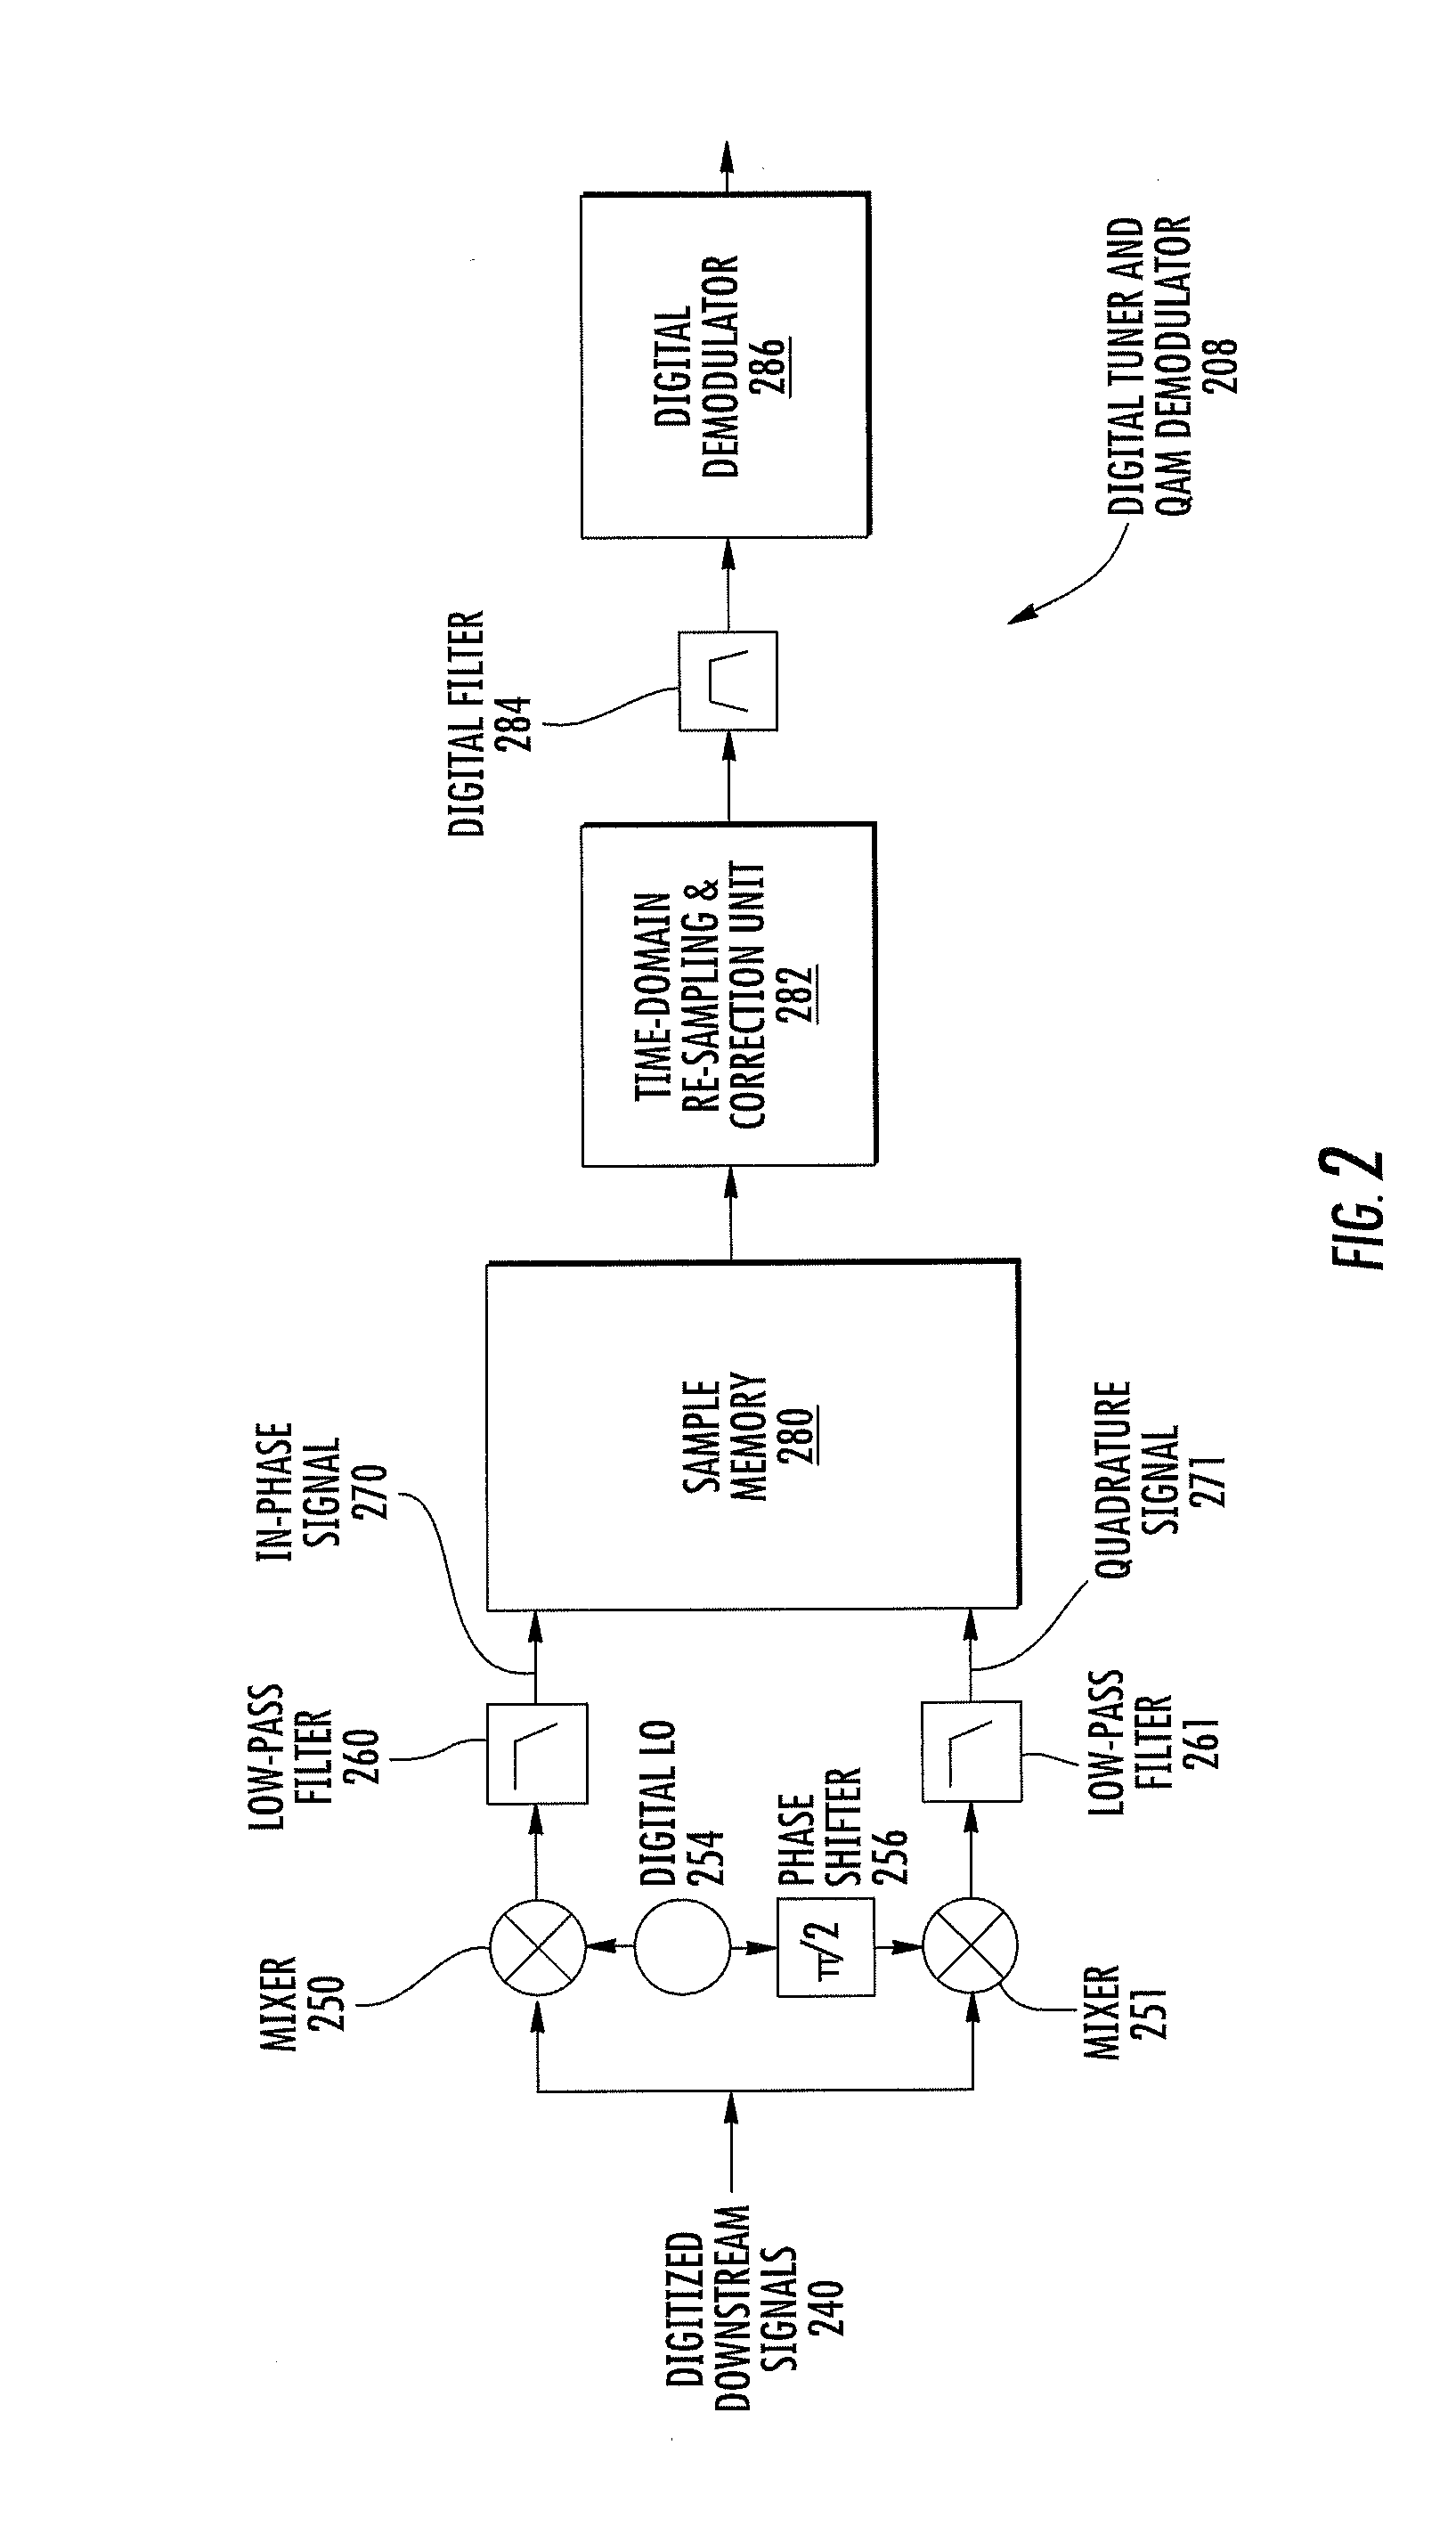 Sampling method for time-interleaved data converters in frequency-multiplexed communications systems